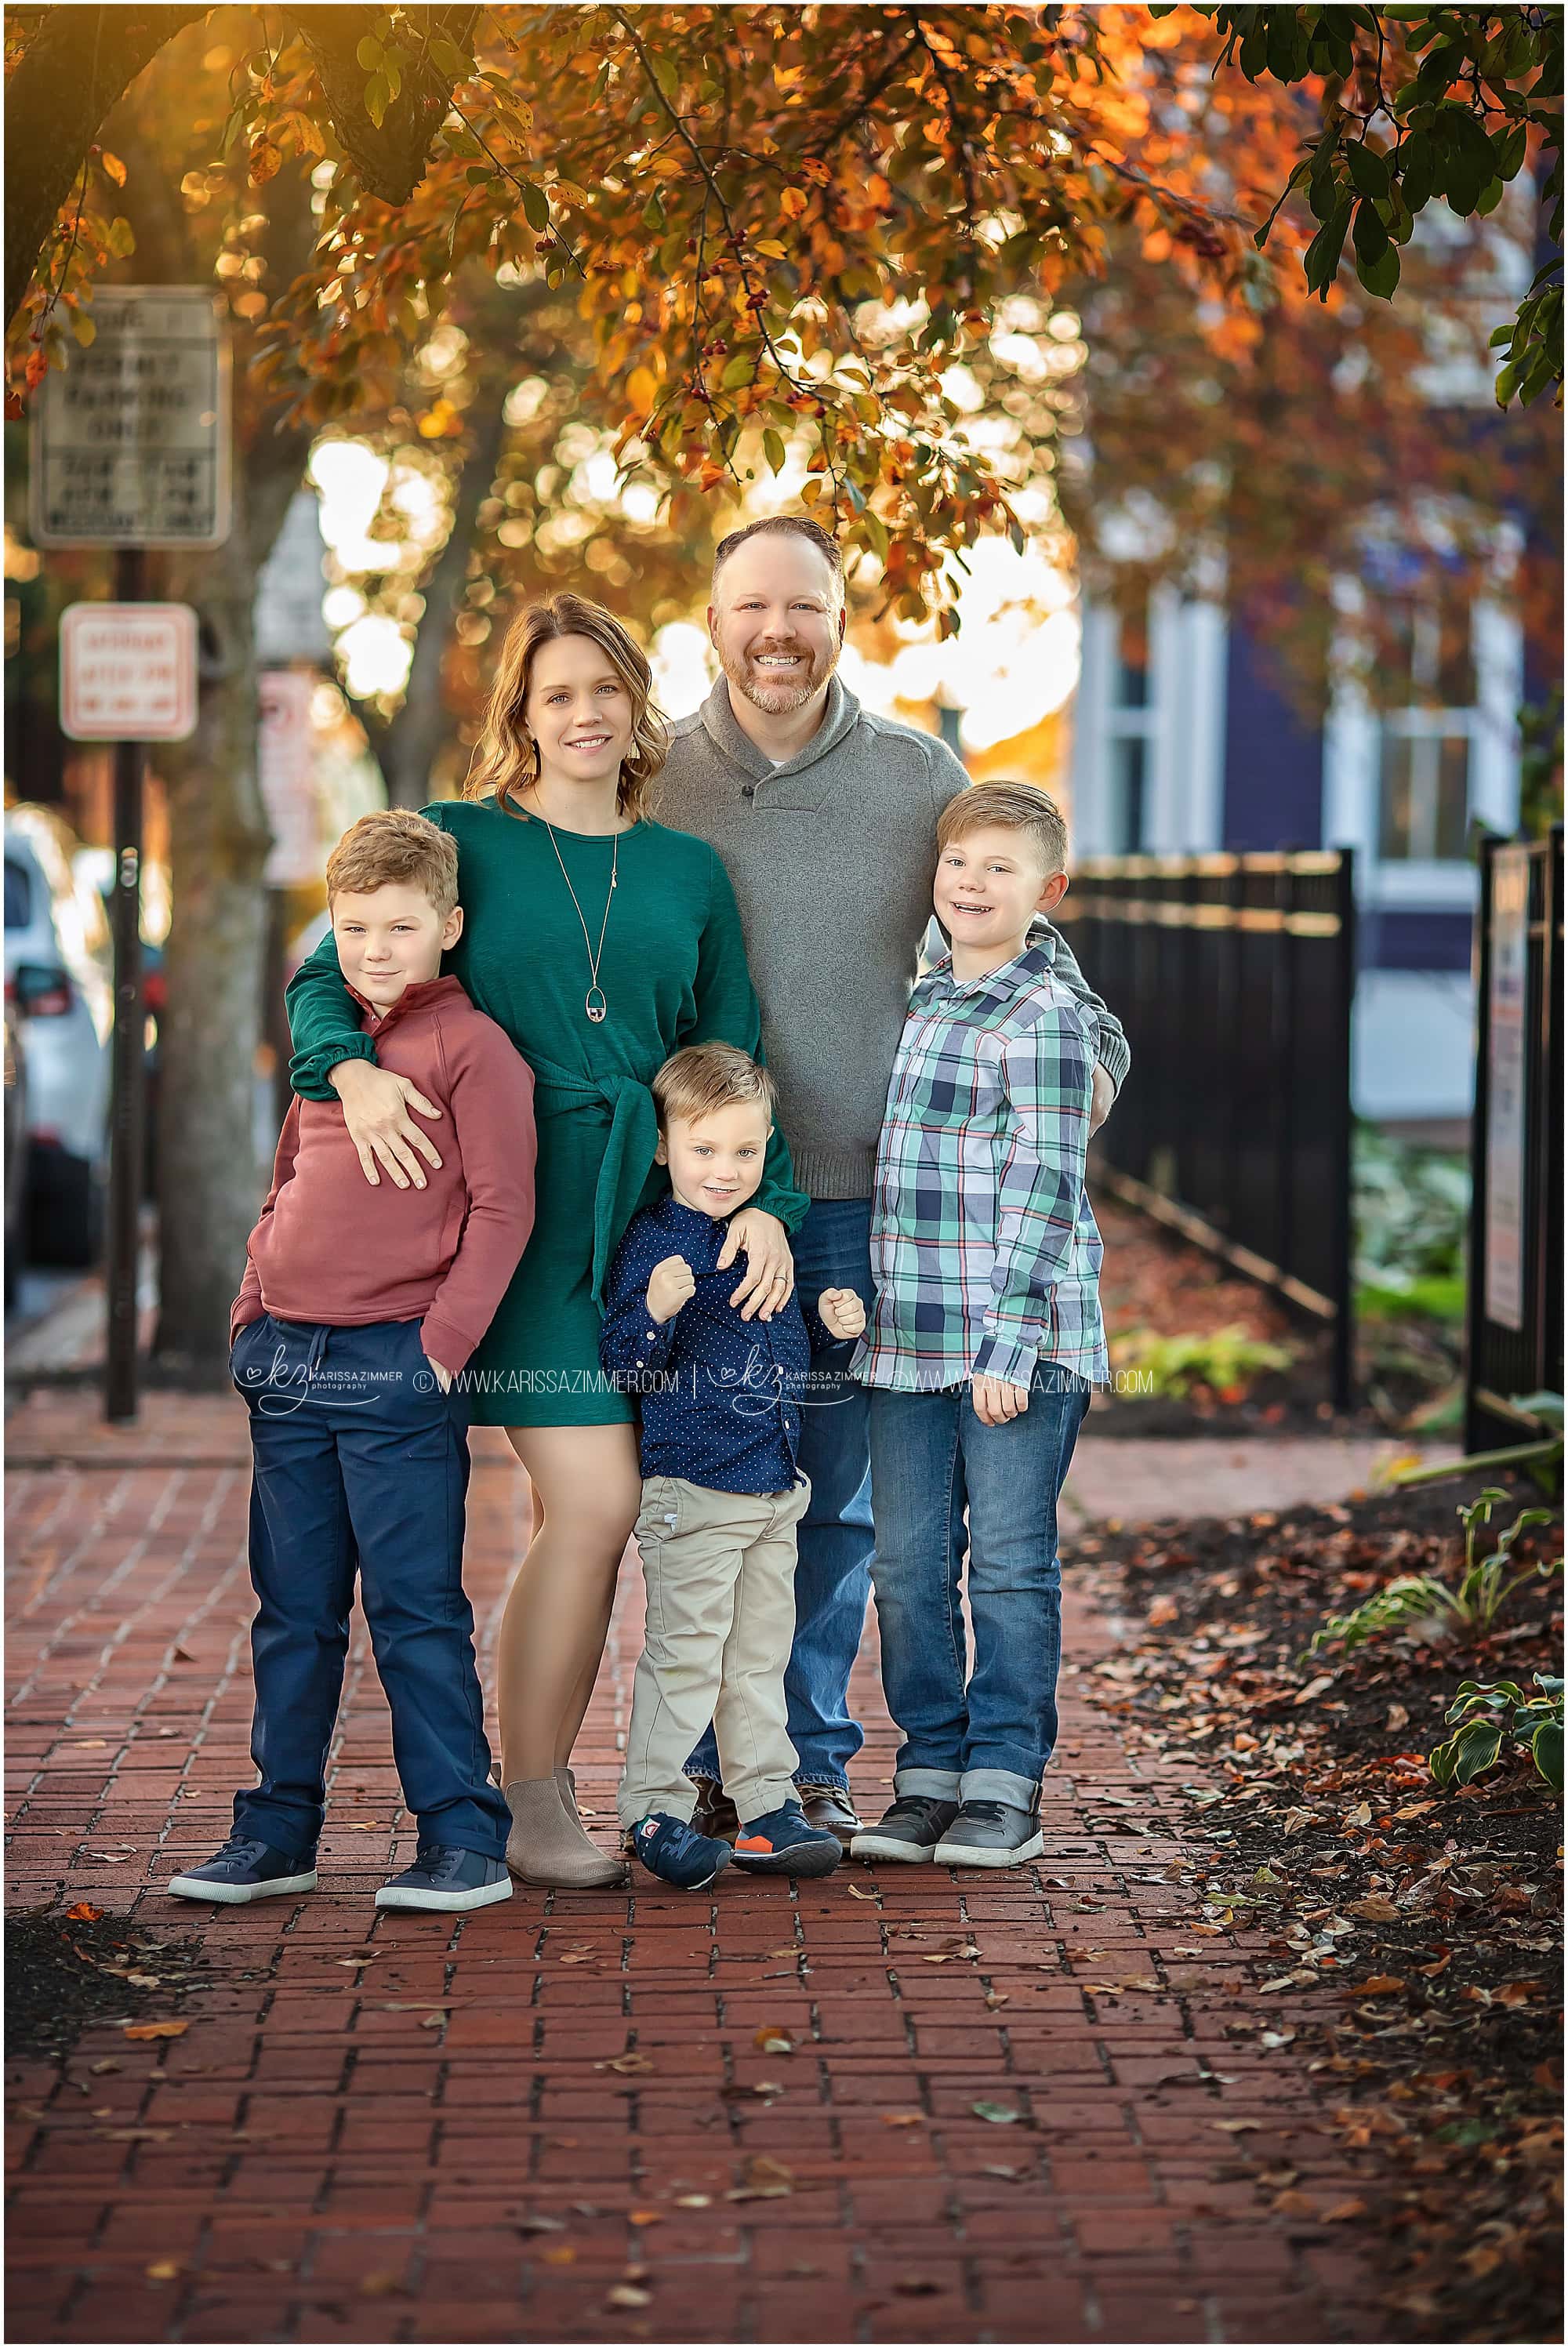 Family Photographer Near Me Camp Hill PA - Fall Family Photography Session